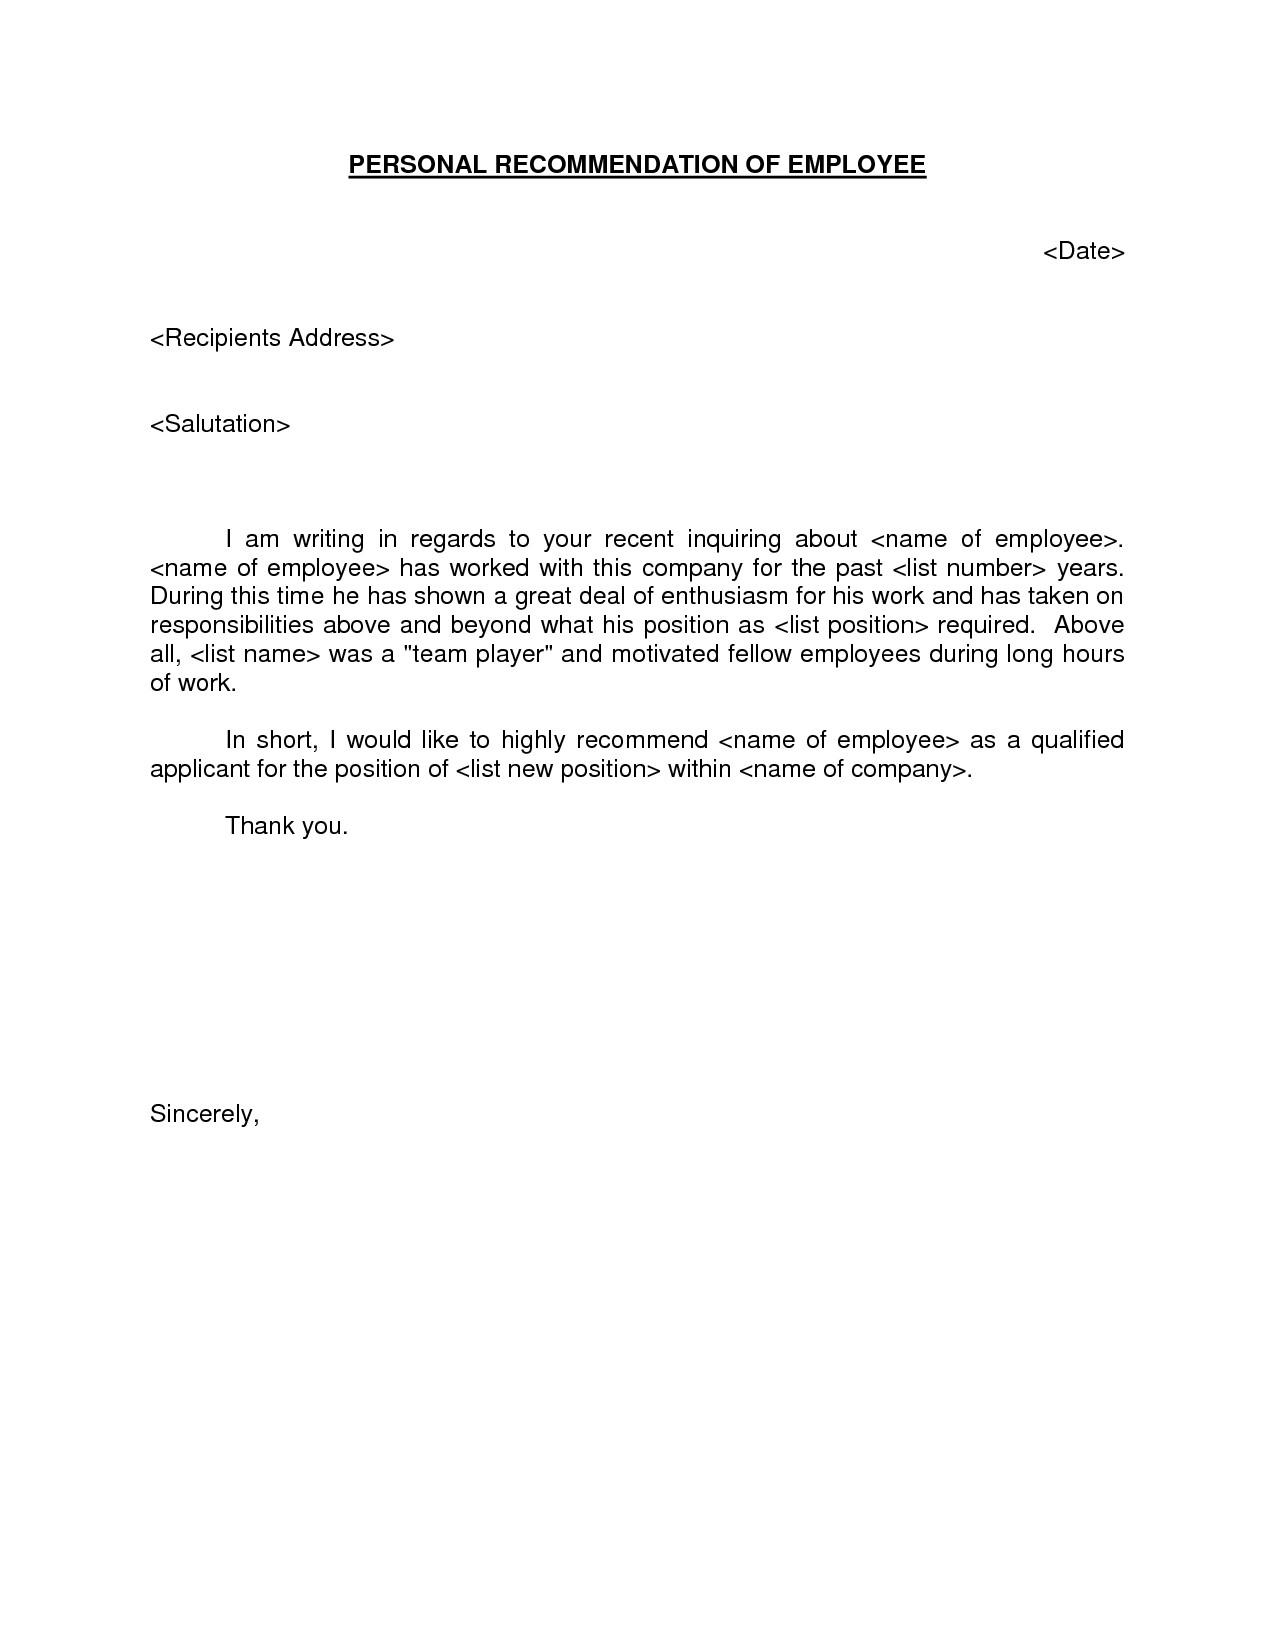 Personal Recommendation Letter Template Pin by Carmen Cruz On Birthdays